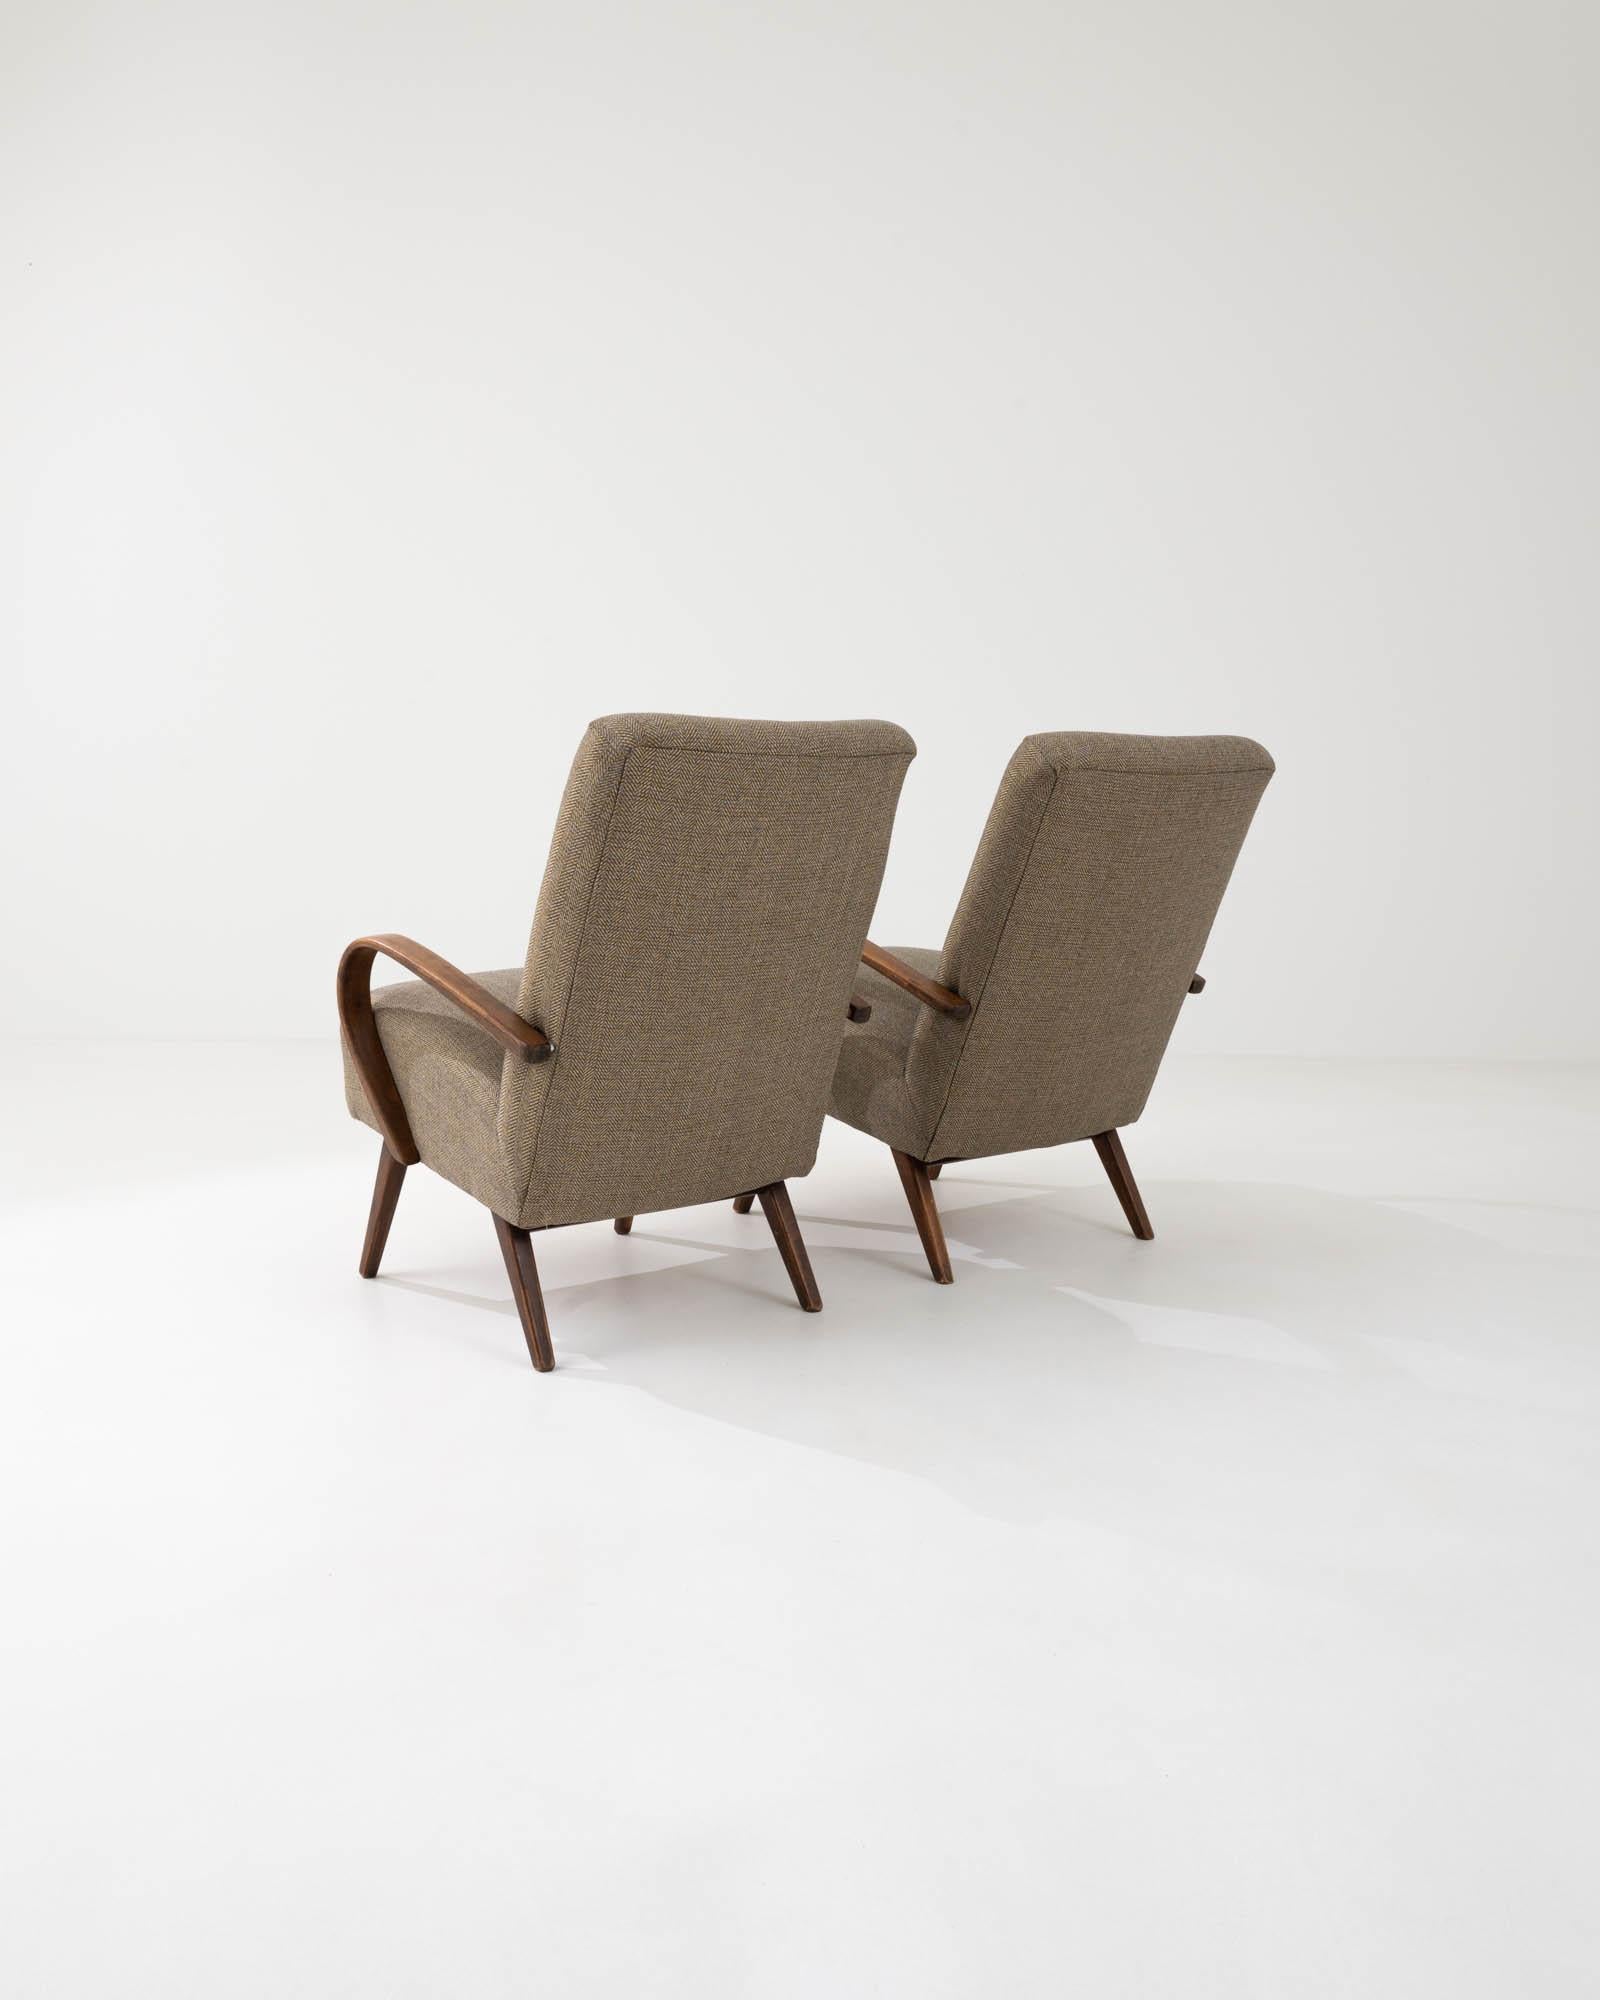 1950s Czech Beige Upholstered Armchairs, a Pair For Sale 1